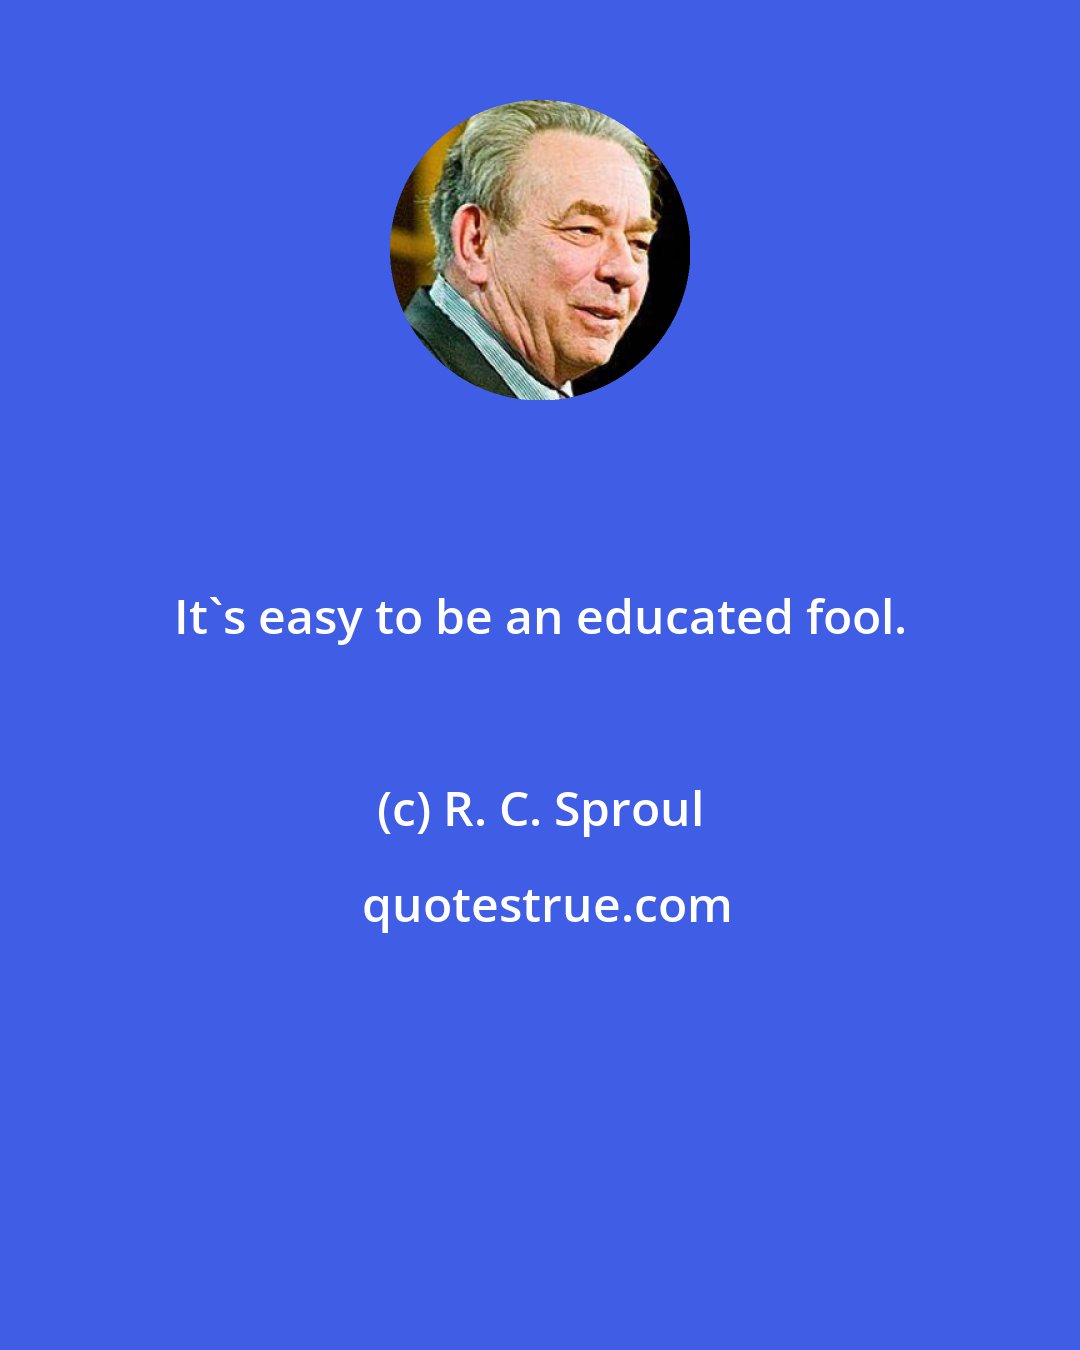 R. C. Sproul: It's easy to be an educated fool.